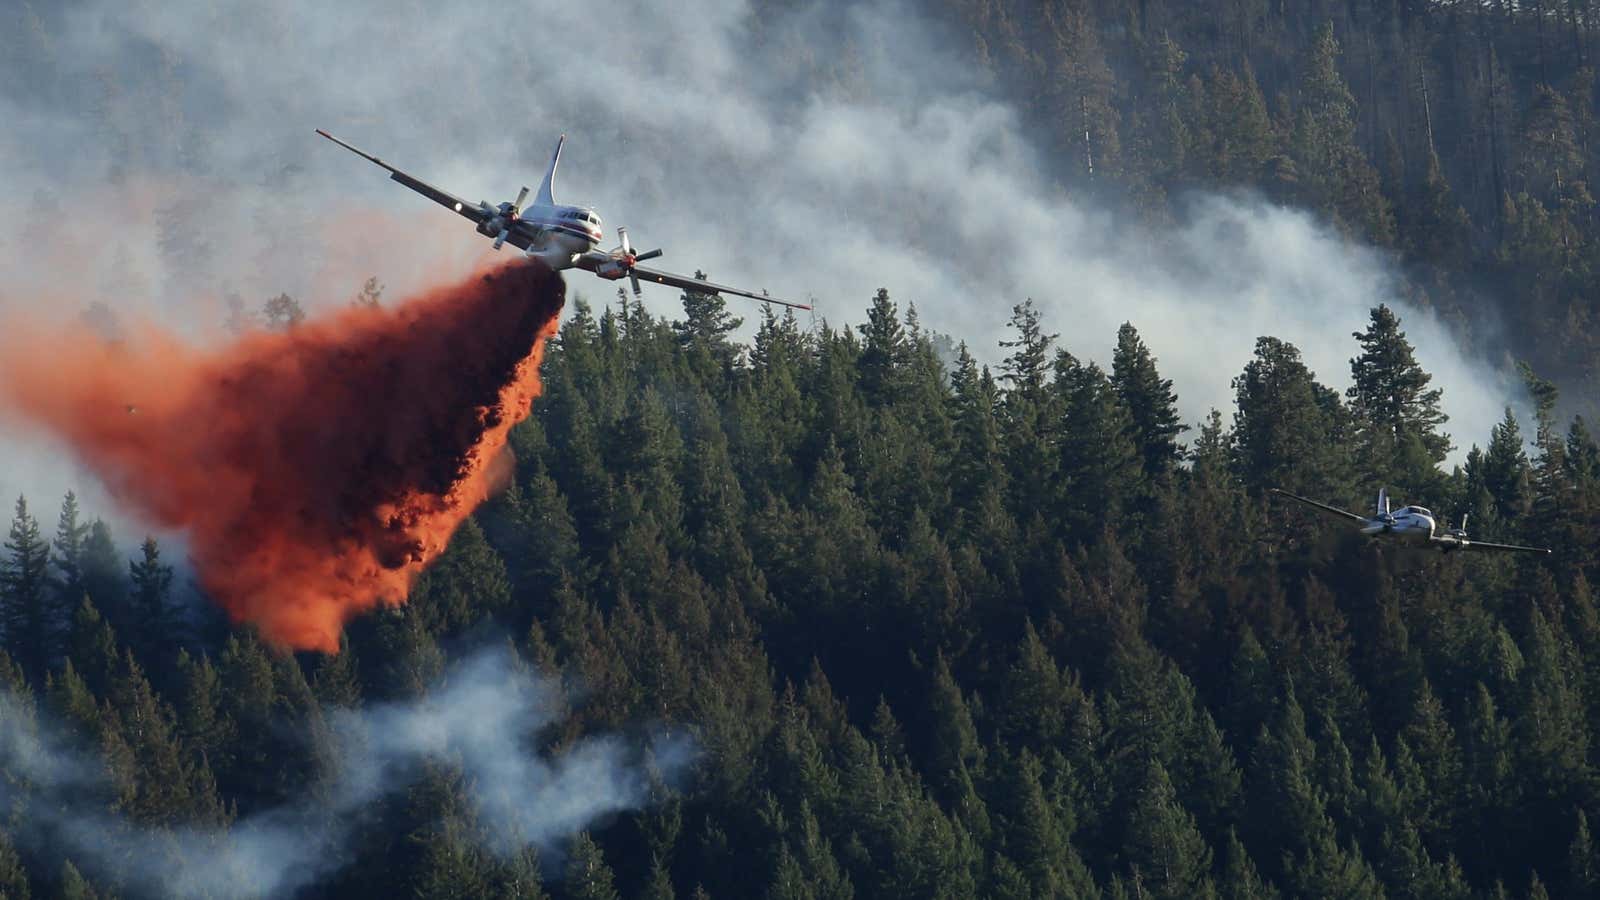 Even a small drone could interfere with a low-flying fire fighting plane.